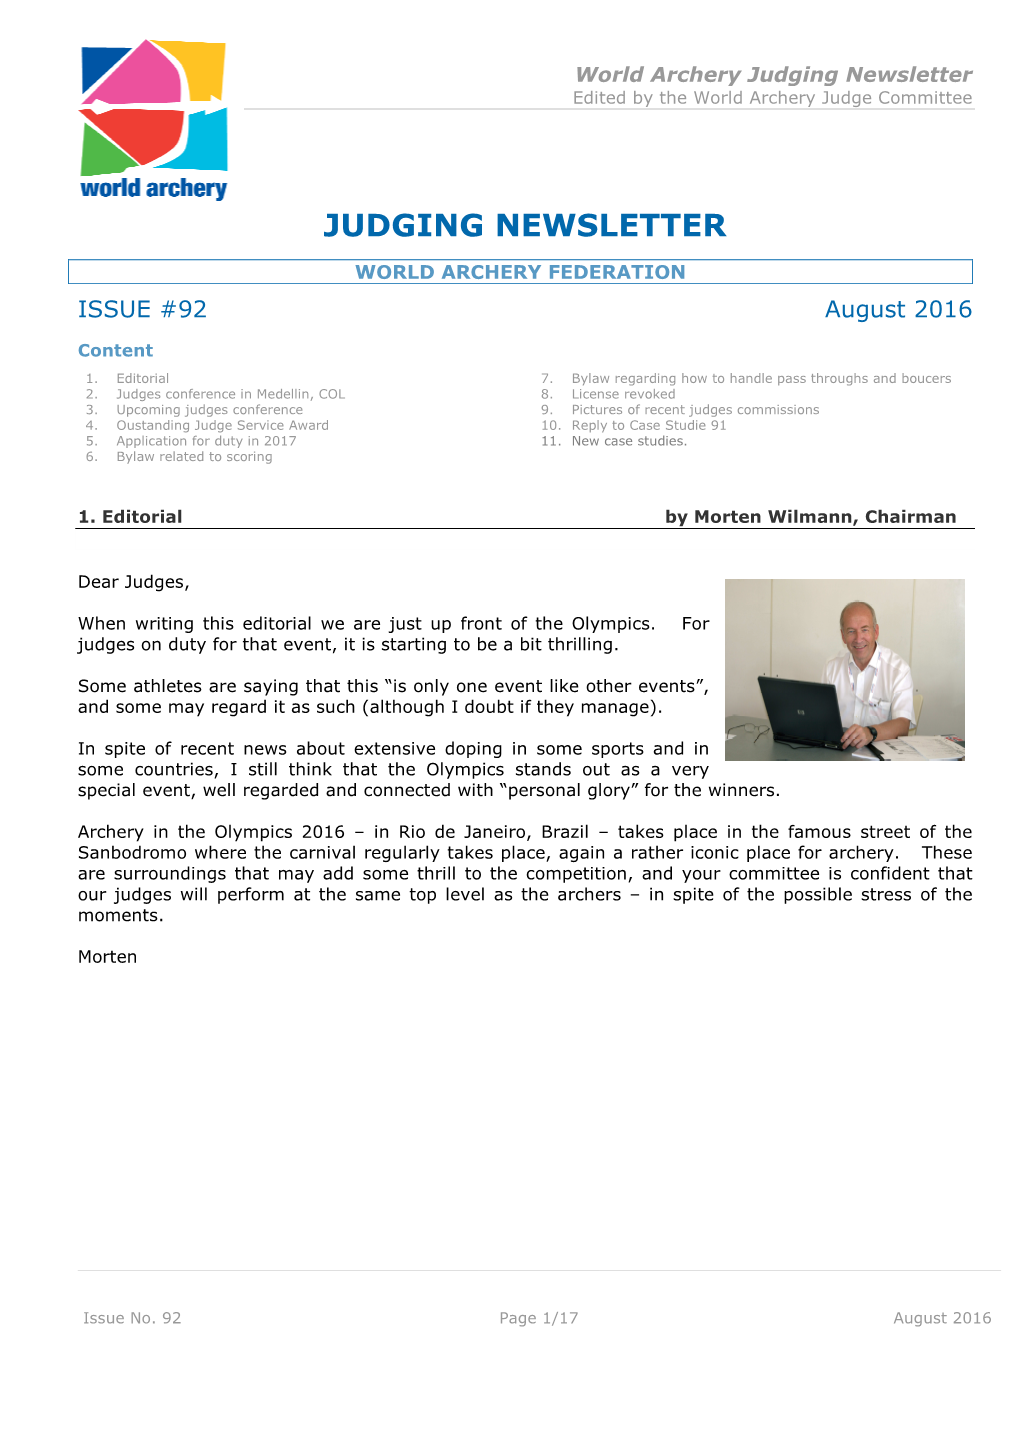 Judging Newsletter Edited by the World Archery Judge Committee